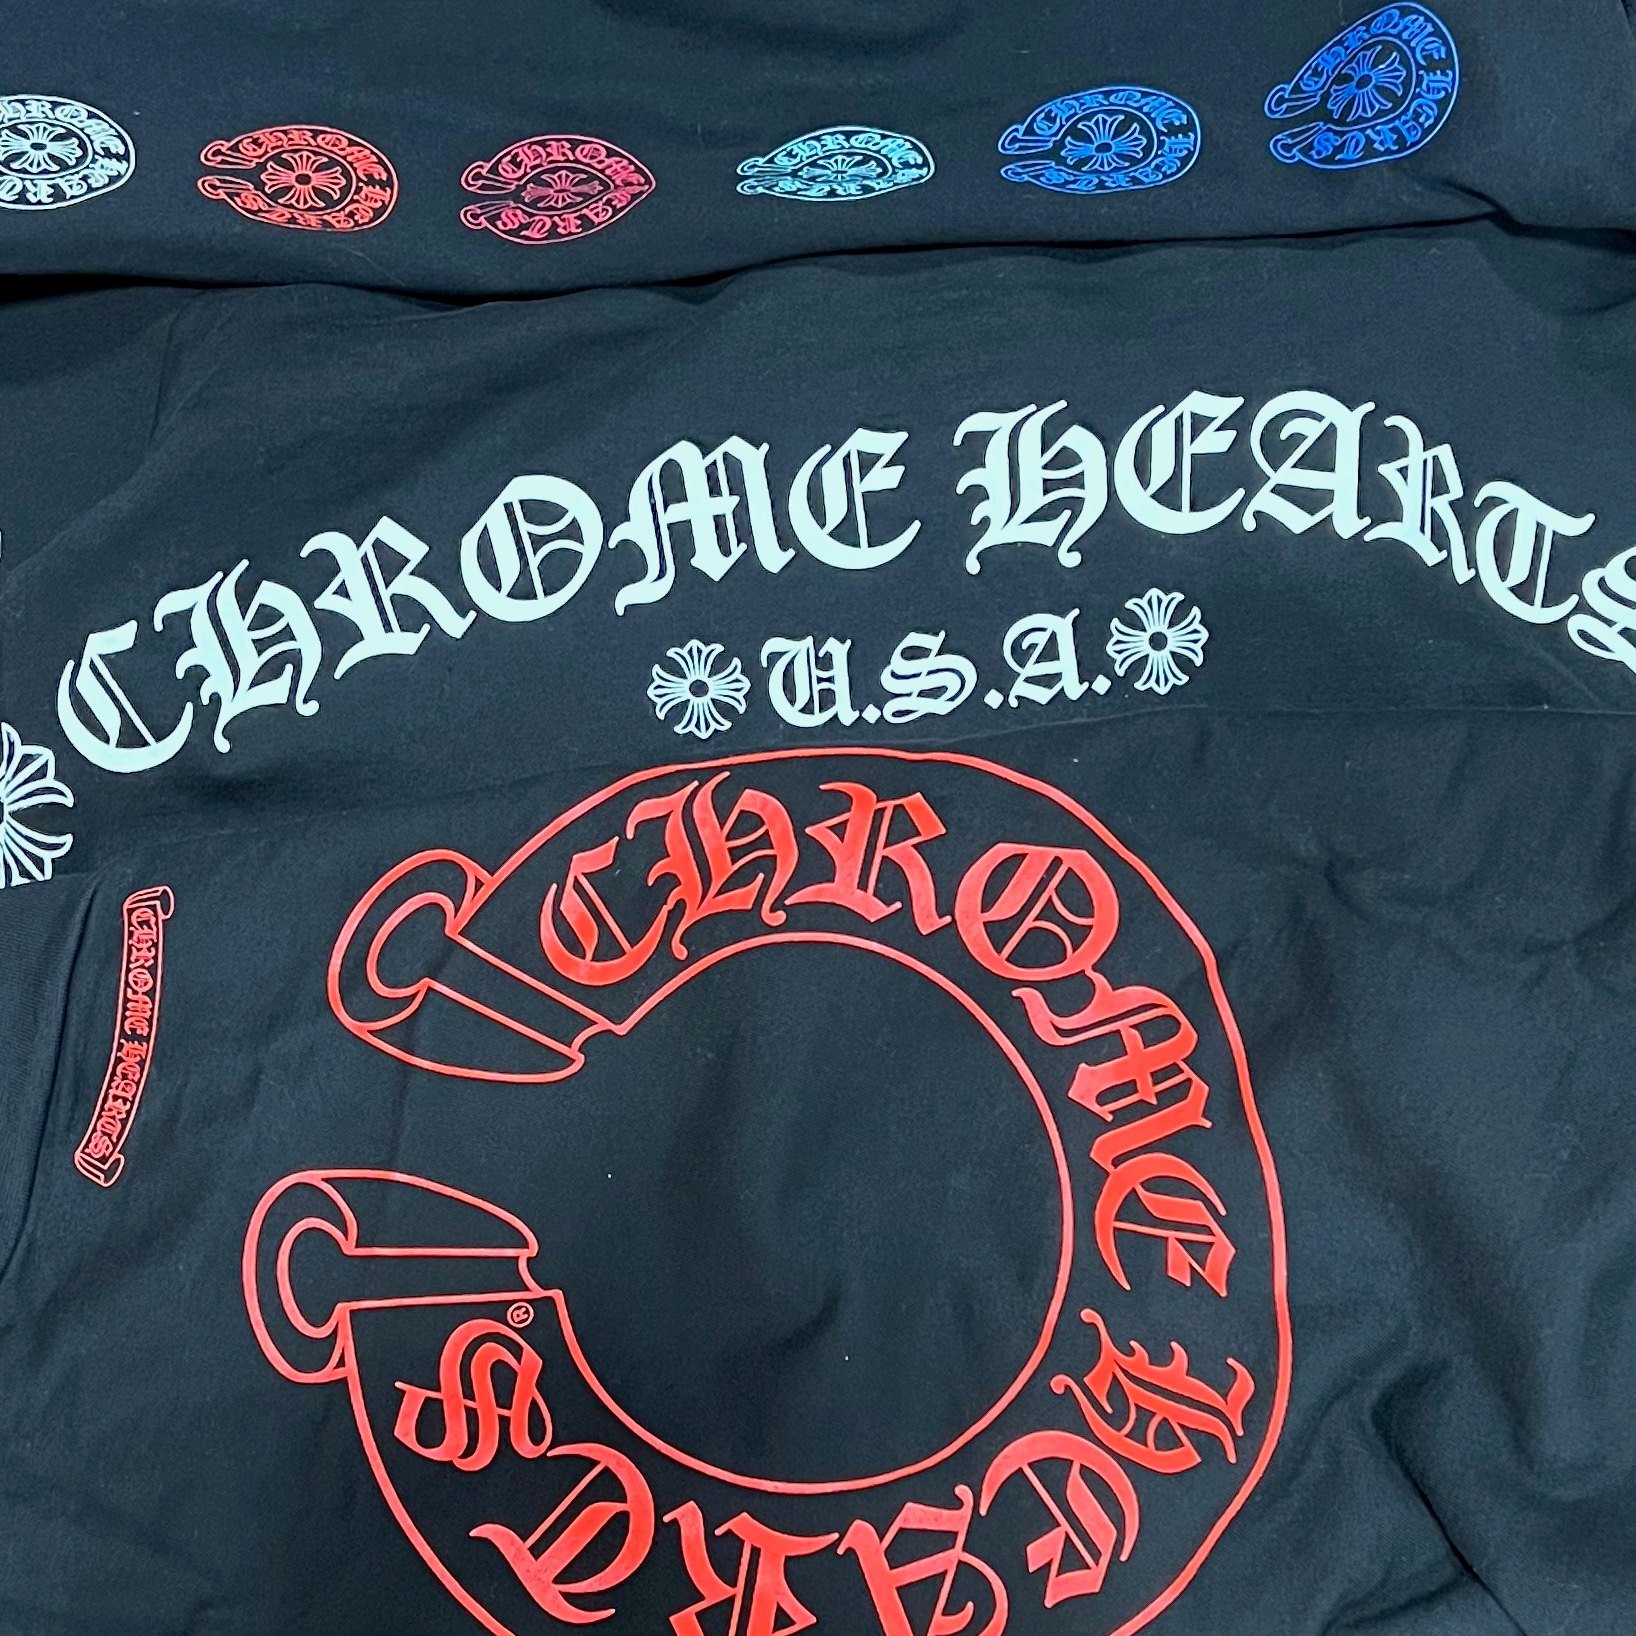 Chic Chrome Hearts apparel collection at Jawns on Fire: A stylish array of edgy streetwear pieces, featuring leather jackets, tees, and accessorie with distinctive Chrome Hearts detailing